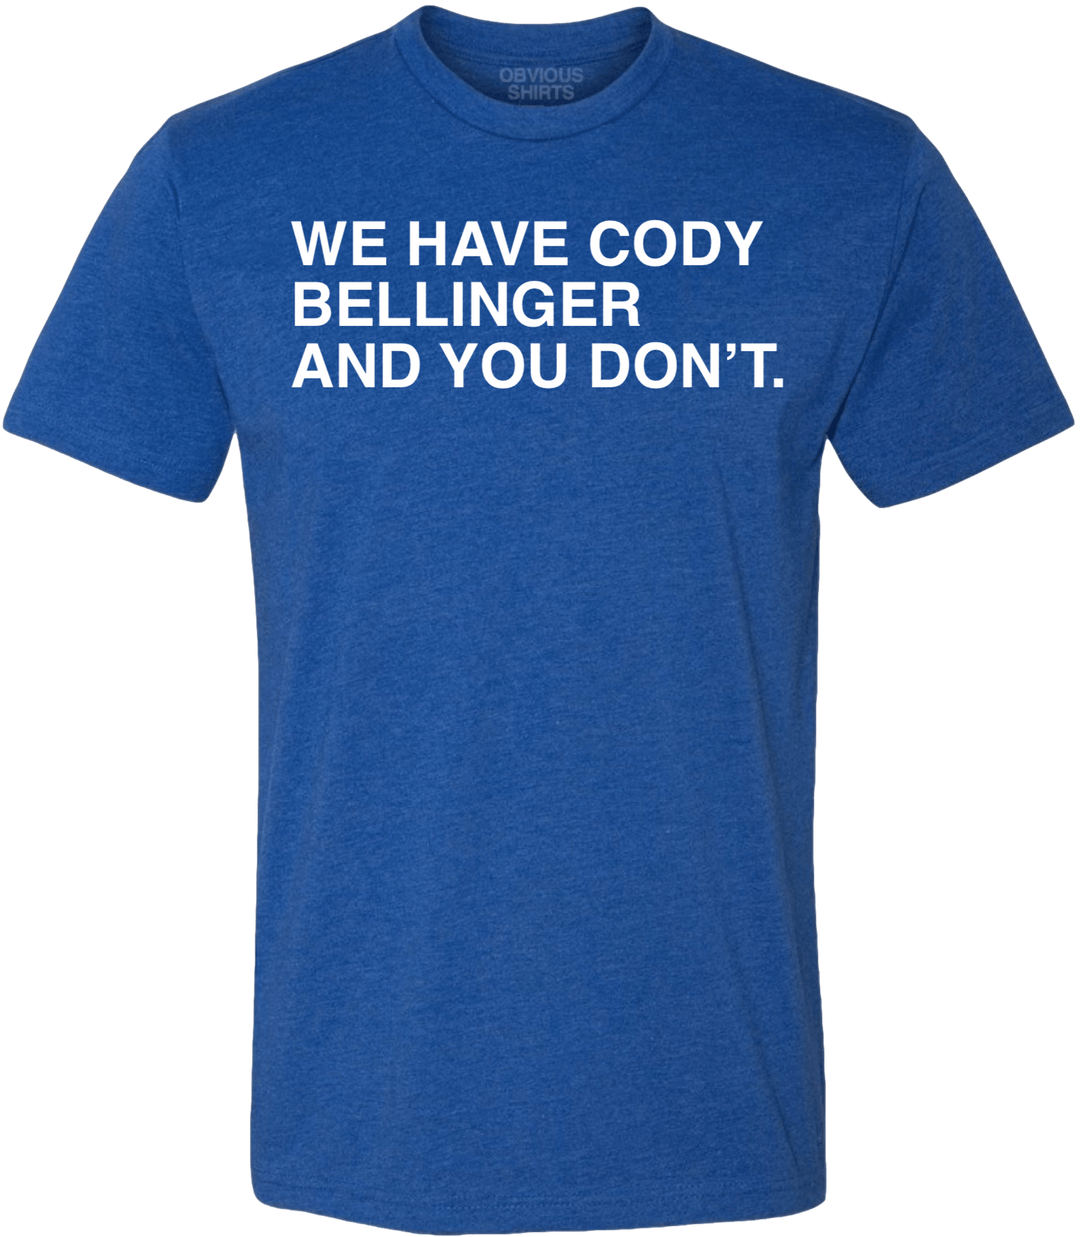 WE HAVE CODY BELLINGER AND YOU DON'T. - OBVIOUS SHIRTS